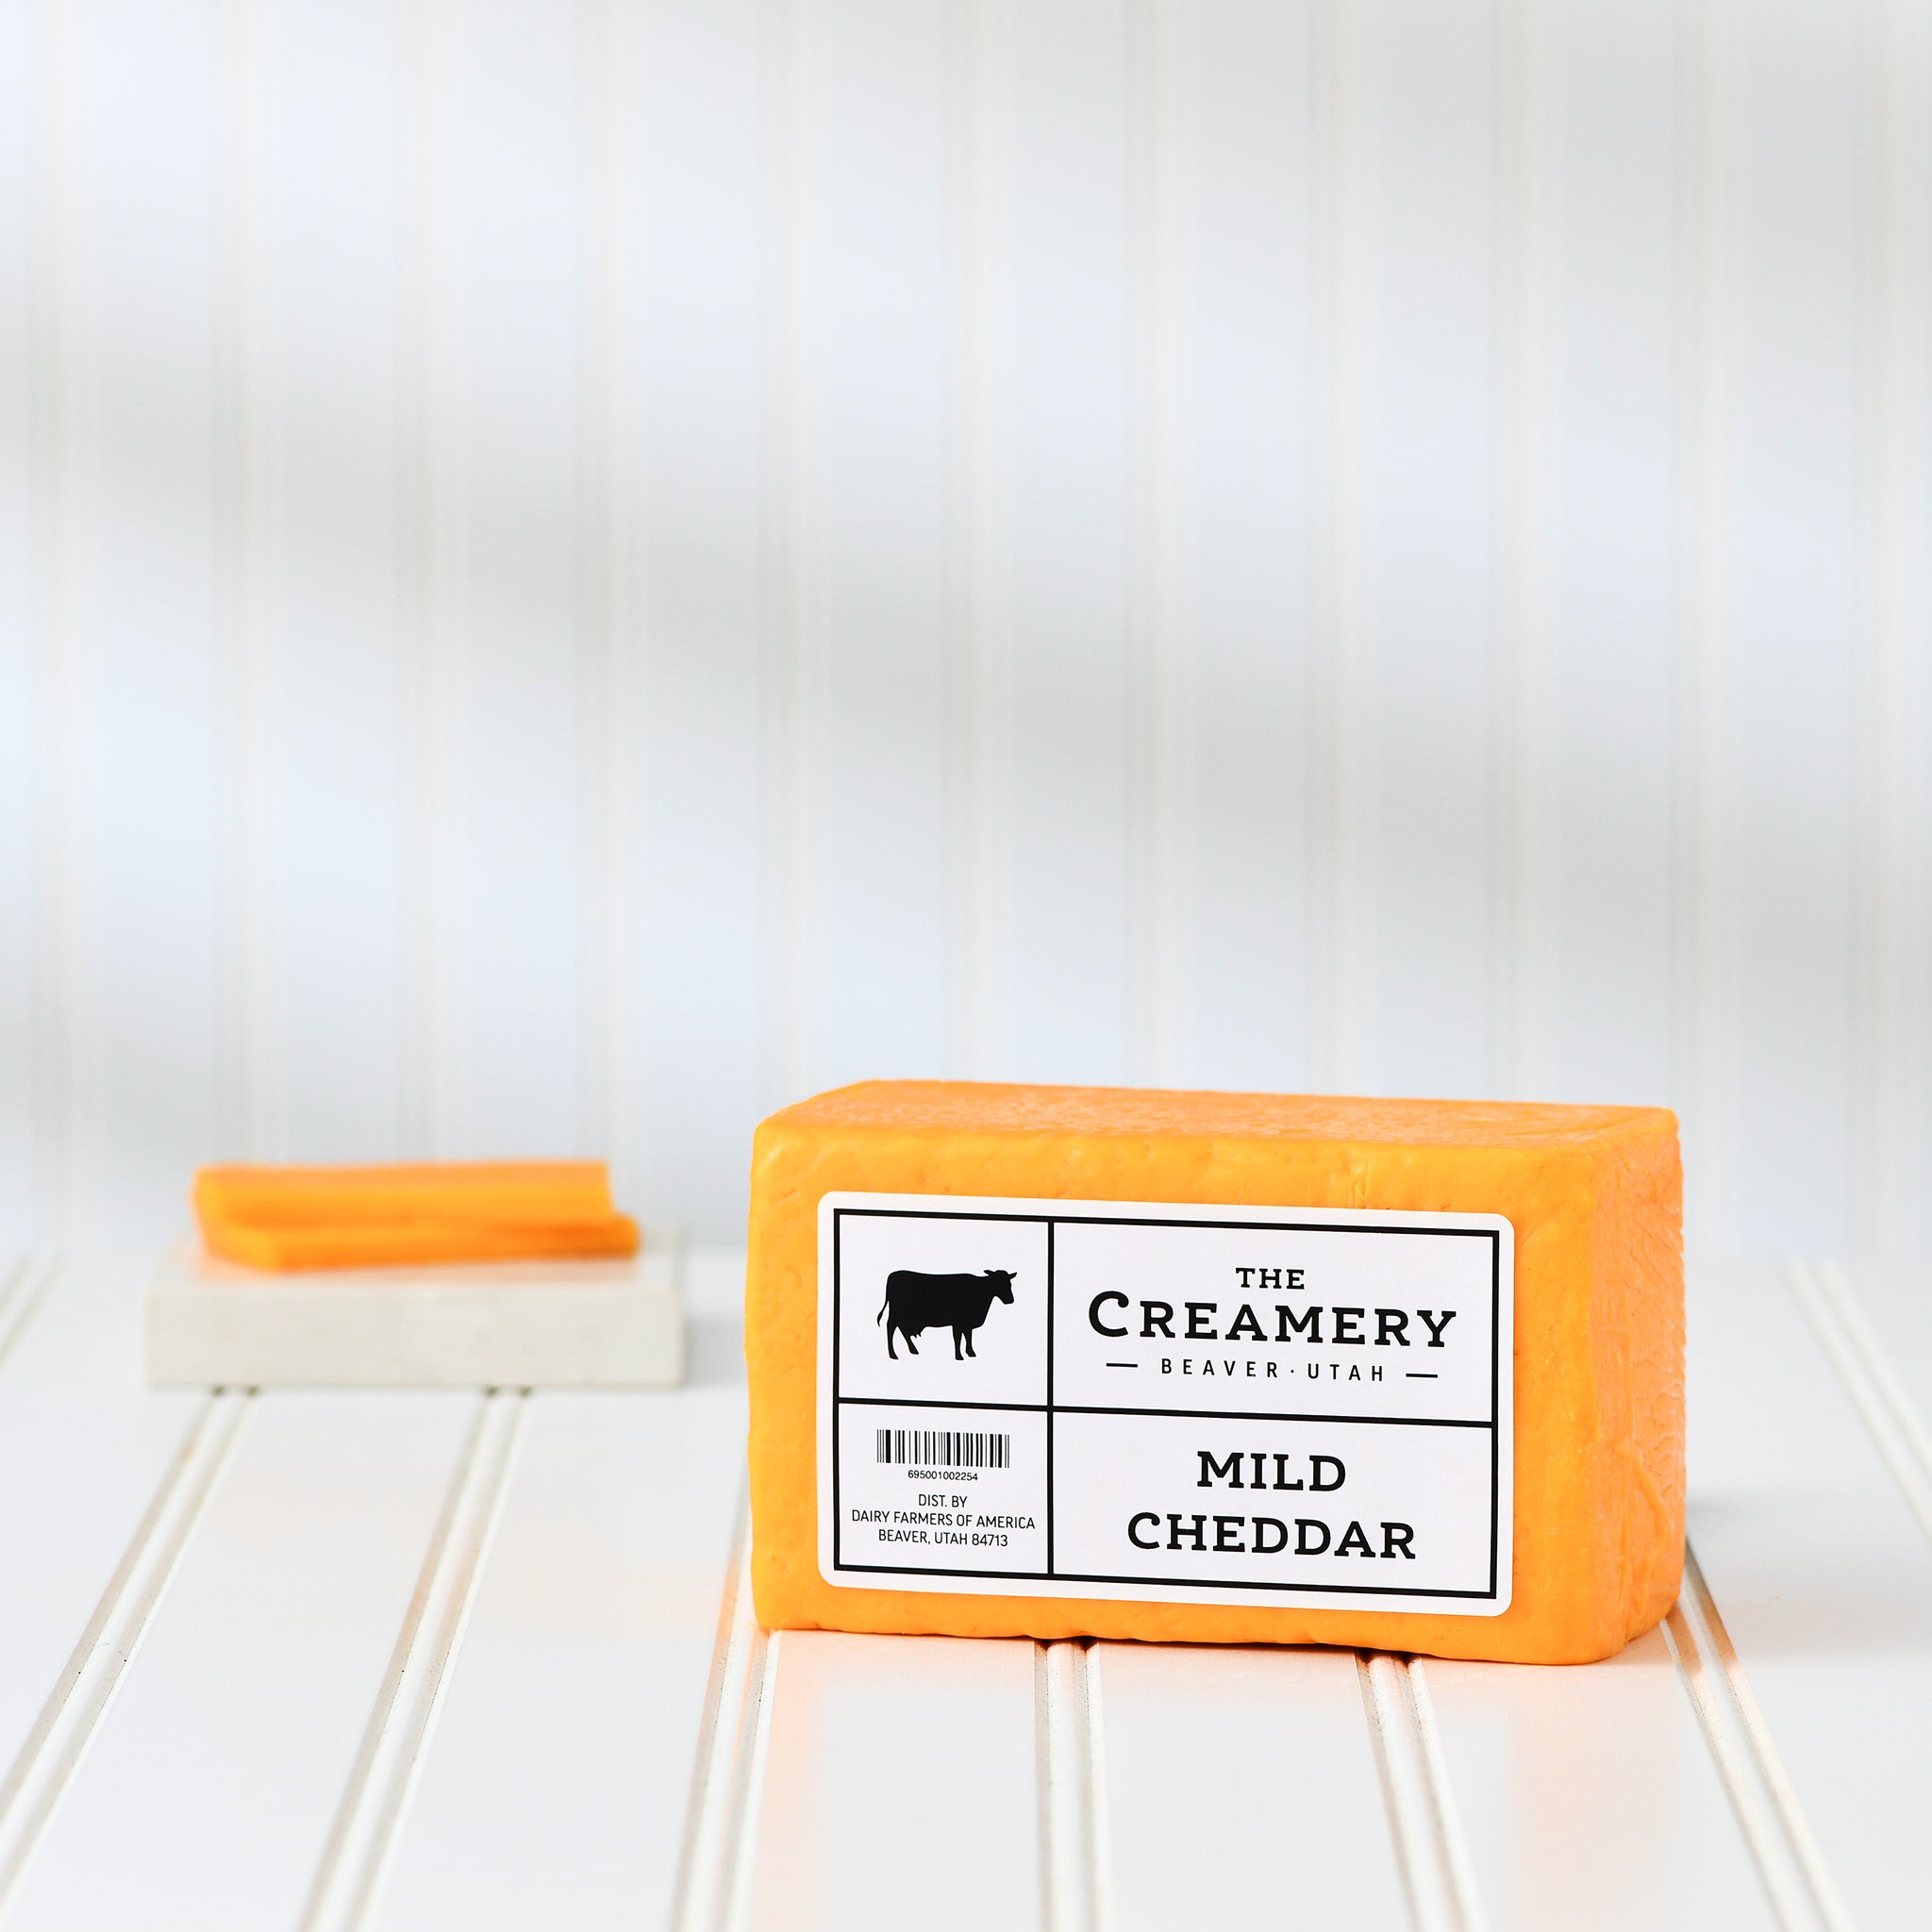 The Creamery Mild Cheddar Cheese